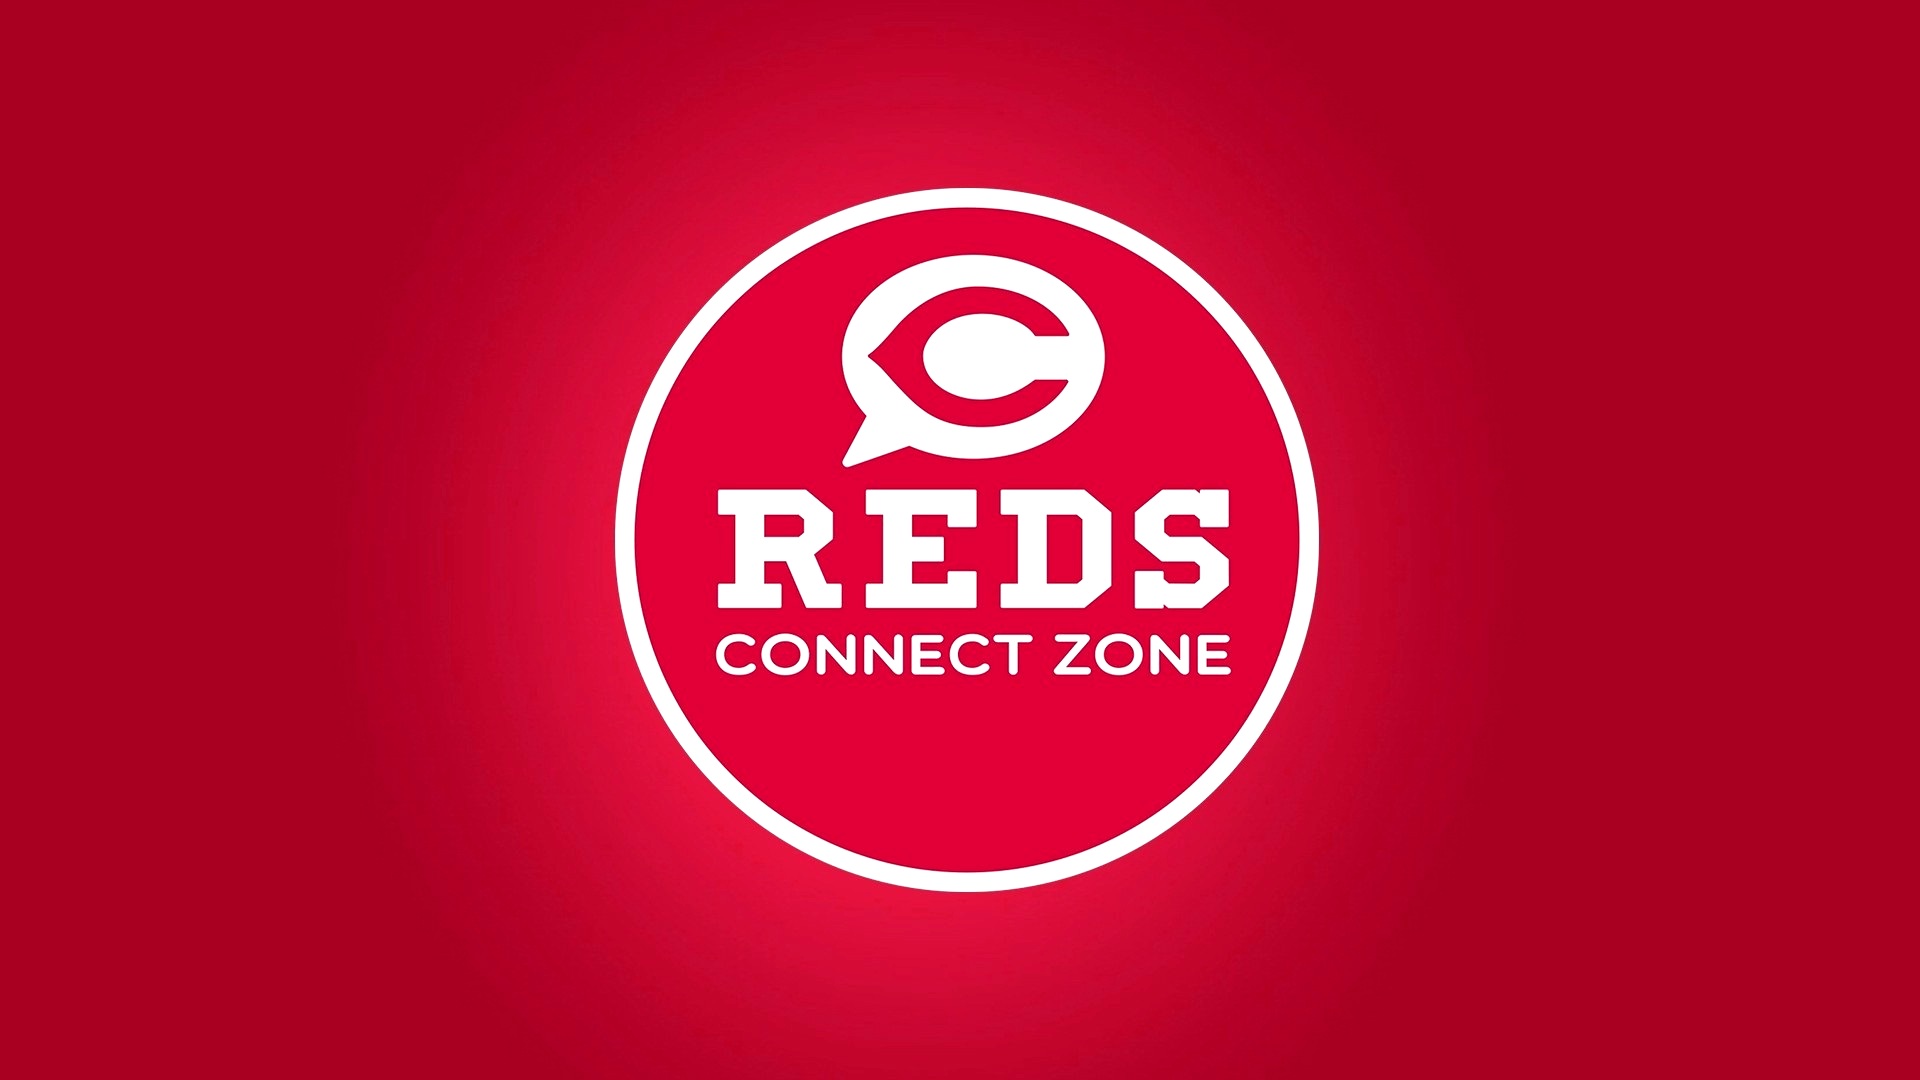 HD Desktop Wallpaper Cincinnati Reds with high-resolution 1920x1080 pixel. You can use this wallpaper for Mac Desktop Wallpaper, Laptop Screensavers, Android Wallpapers, Tablet or iPhone Home Screen and another mobile phone device